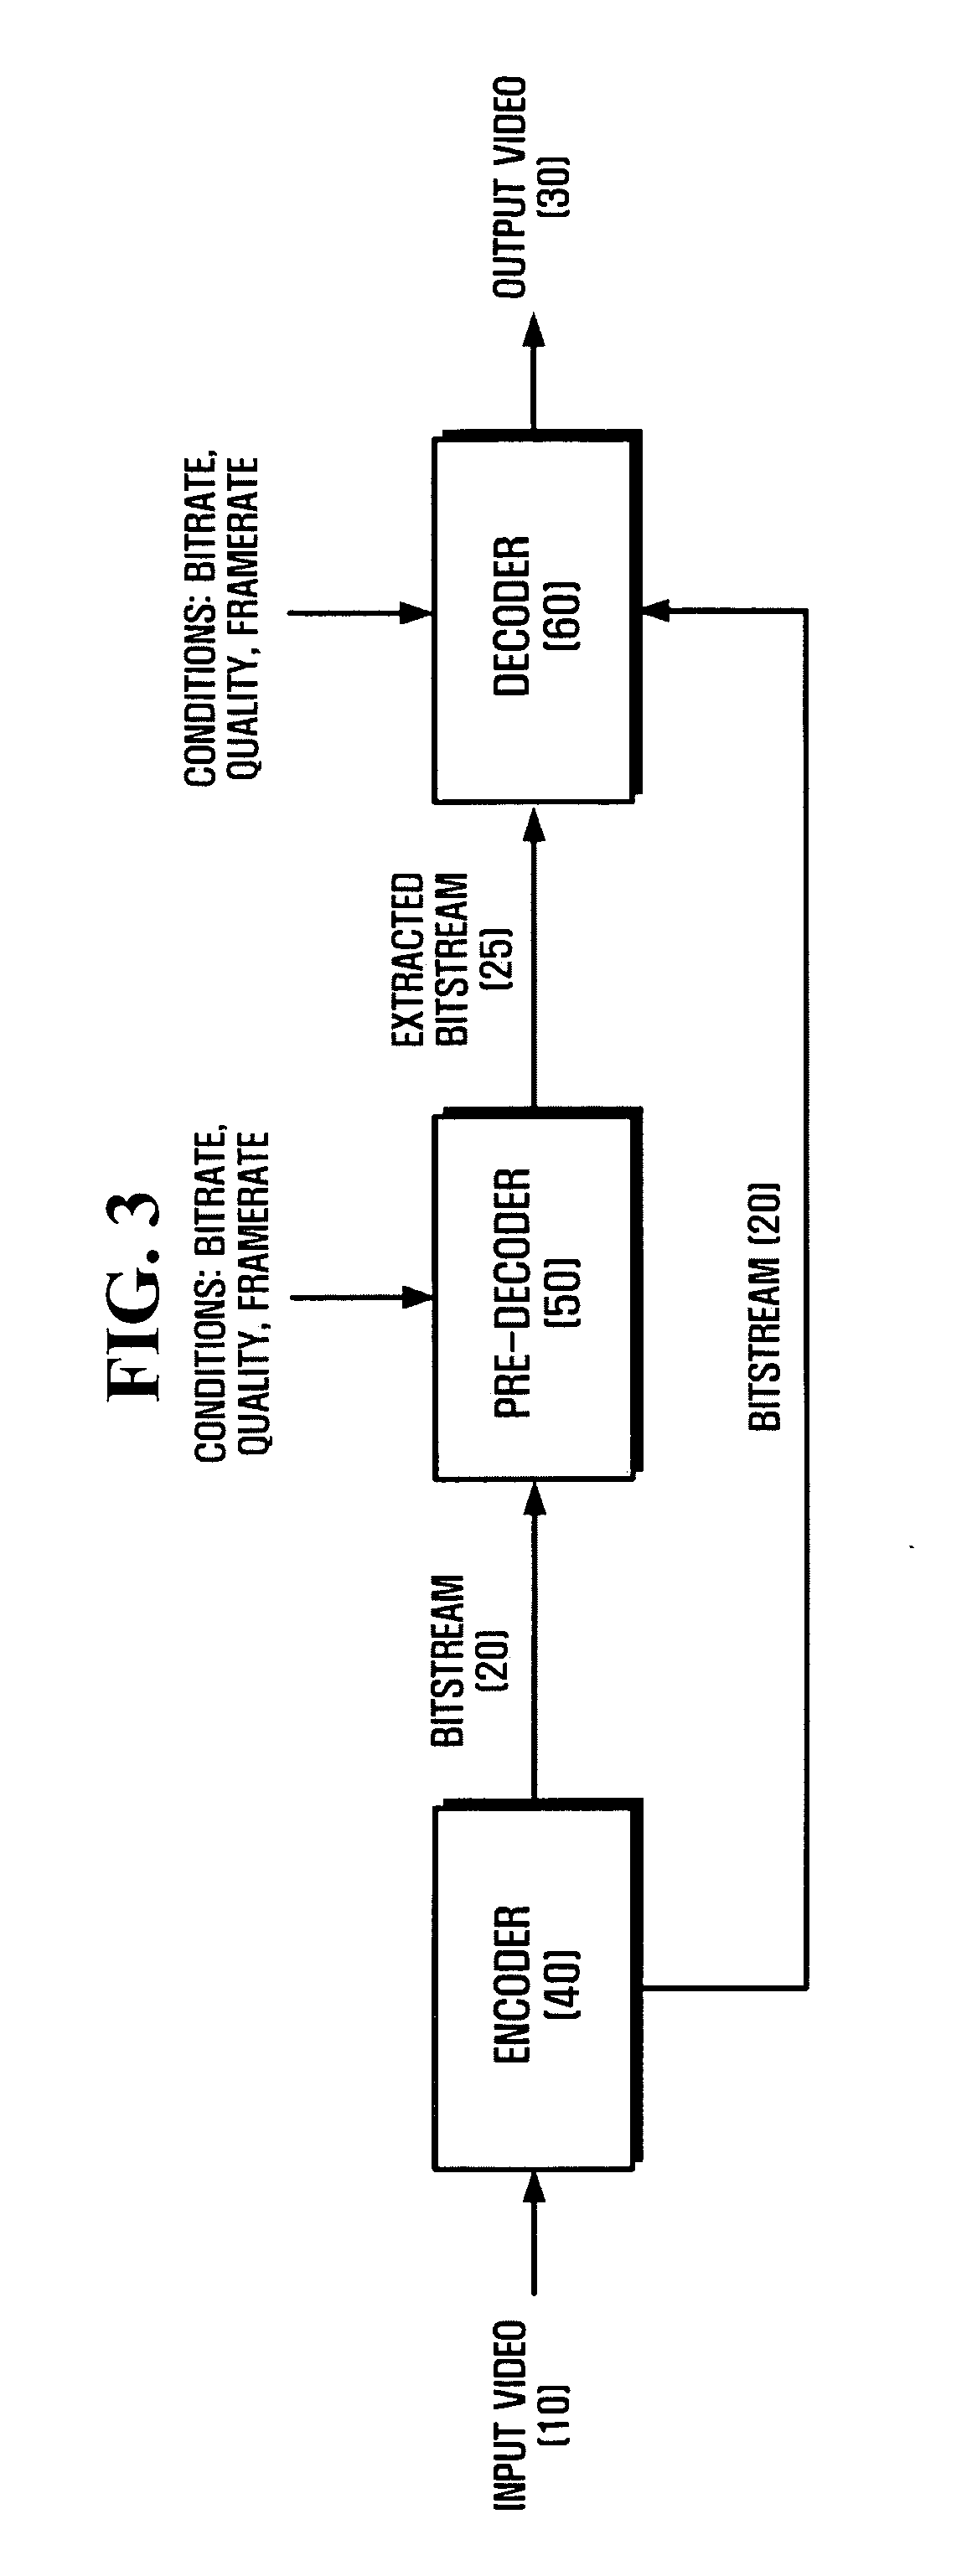 Scalable video coding method and apparatus using base-layer